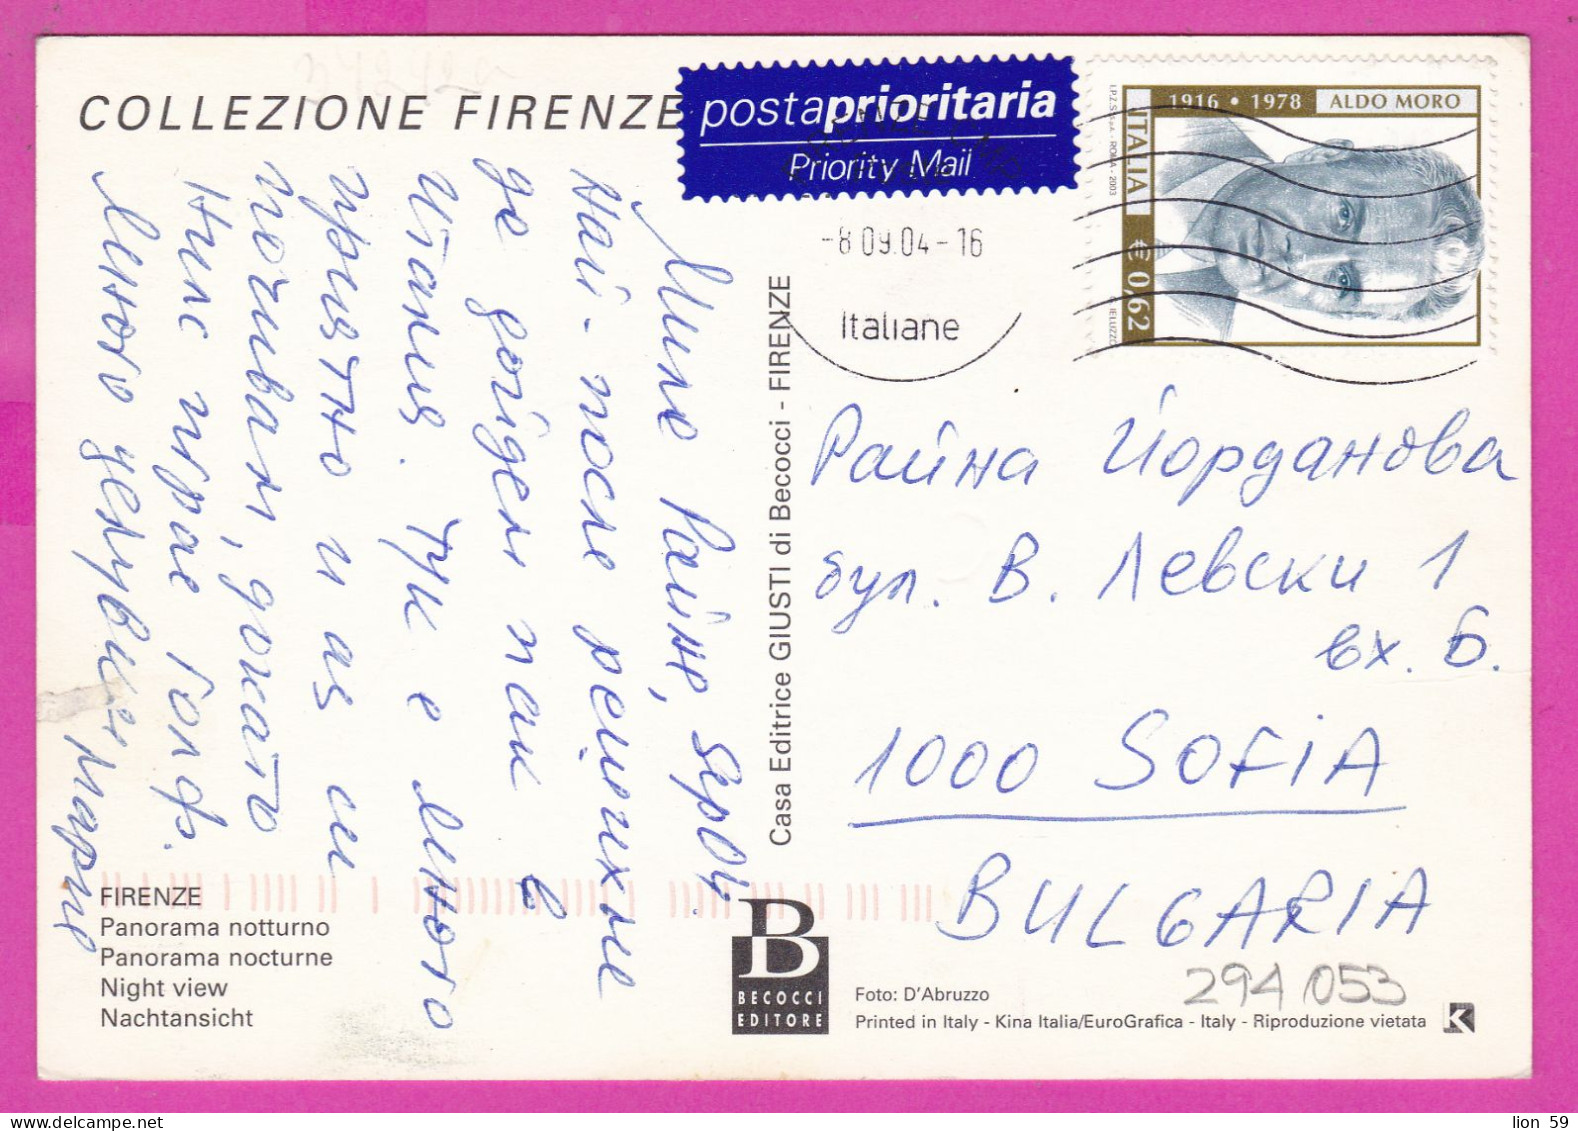 294053 / Italy - FIRENZE Panoram A Notturno Night PC 2004 USED - 0.62€ Death Of Aldo Moro Former Prime Minister - 2001-10: Marcophilia